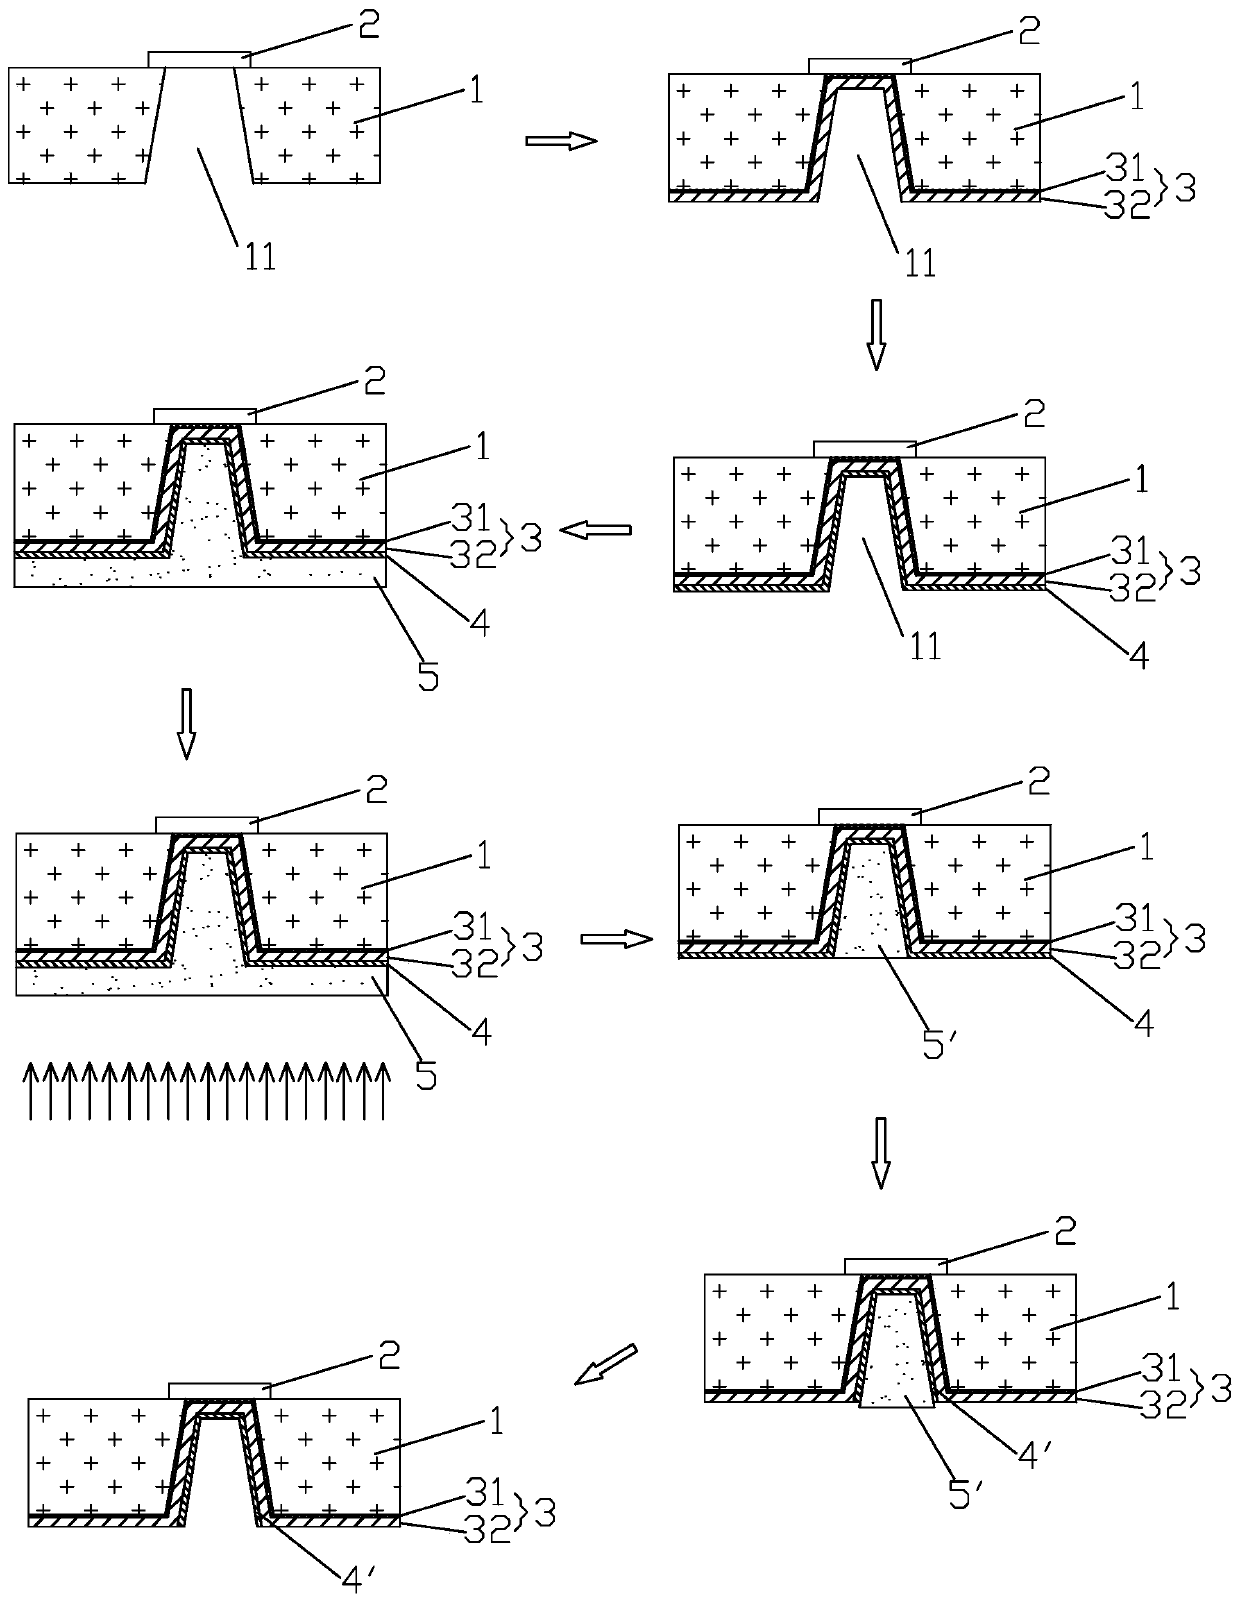 Back segment technology for improving reliability performance of compound semiconductor device